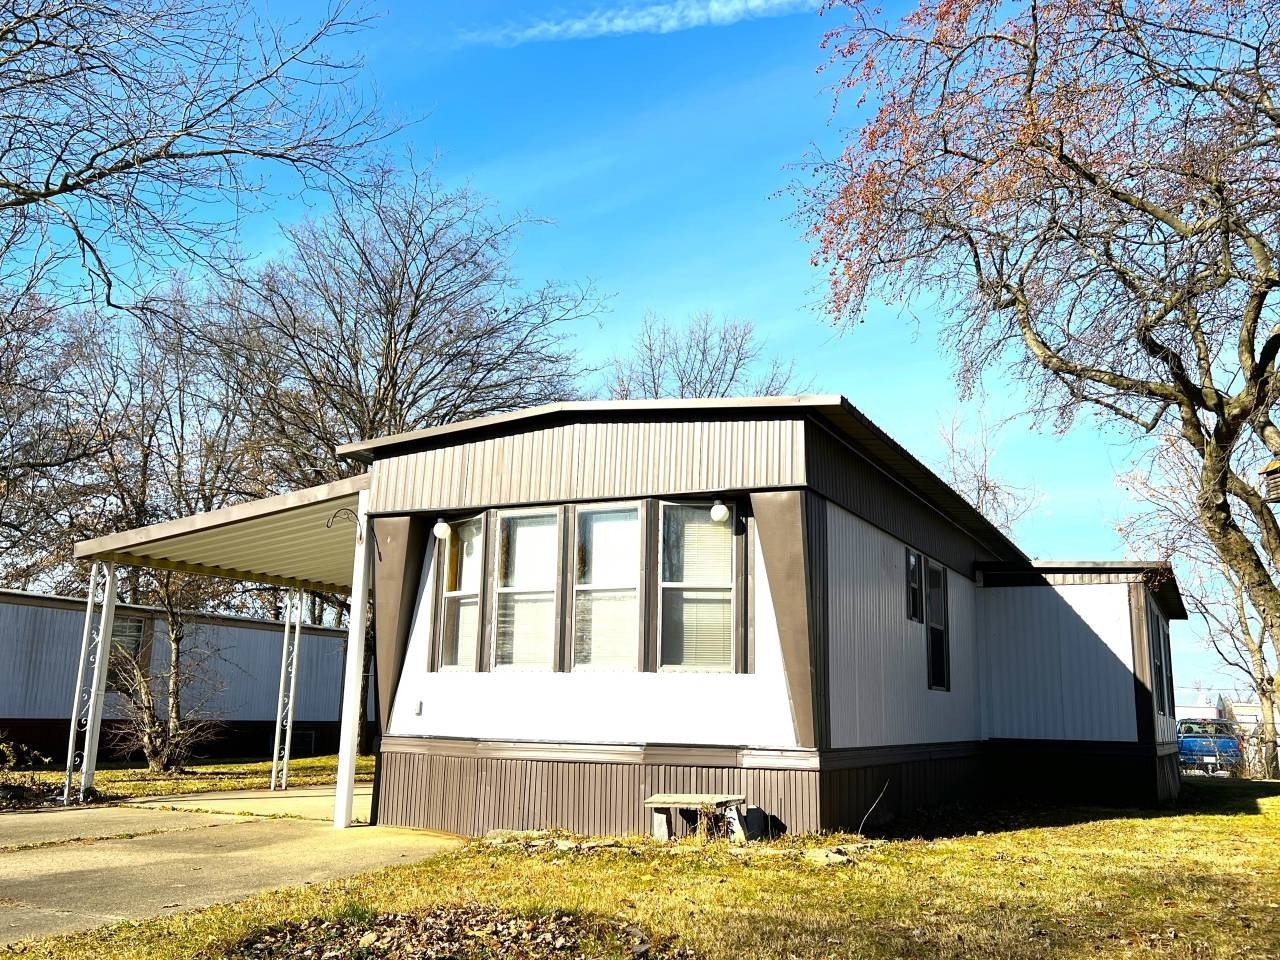 2. 202 W. Glenwood St. Leased Land Mobile Home Only Being Sold.